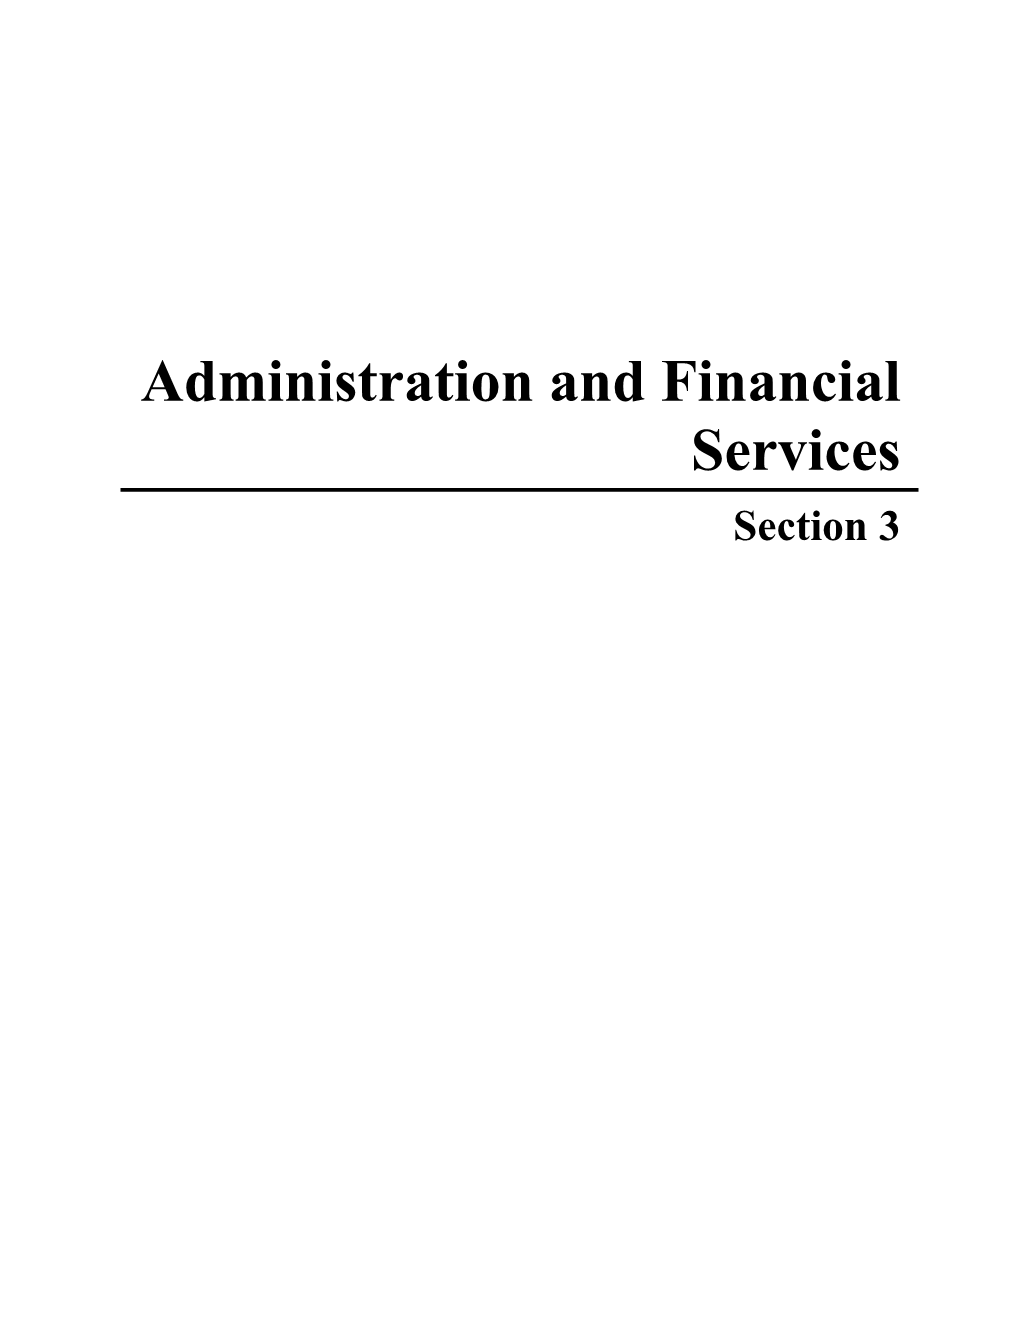 Section 3: Administrative & Financial Services